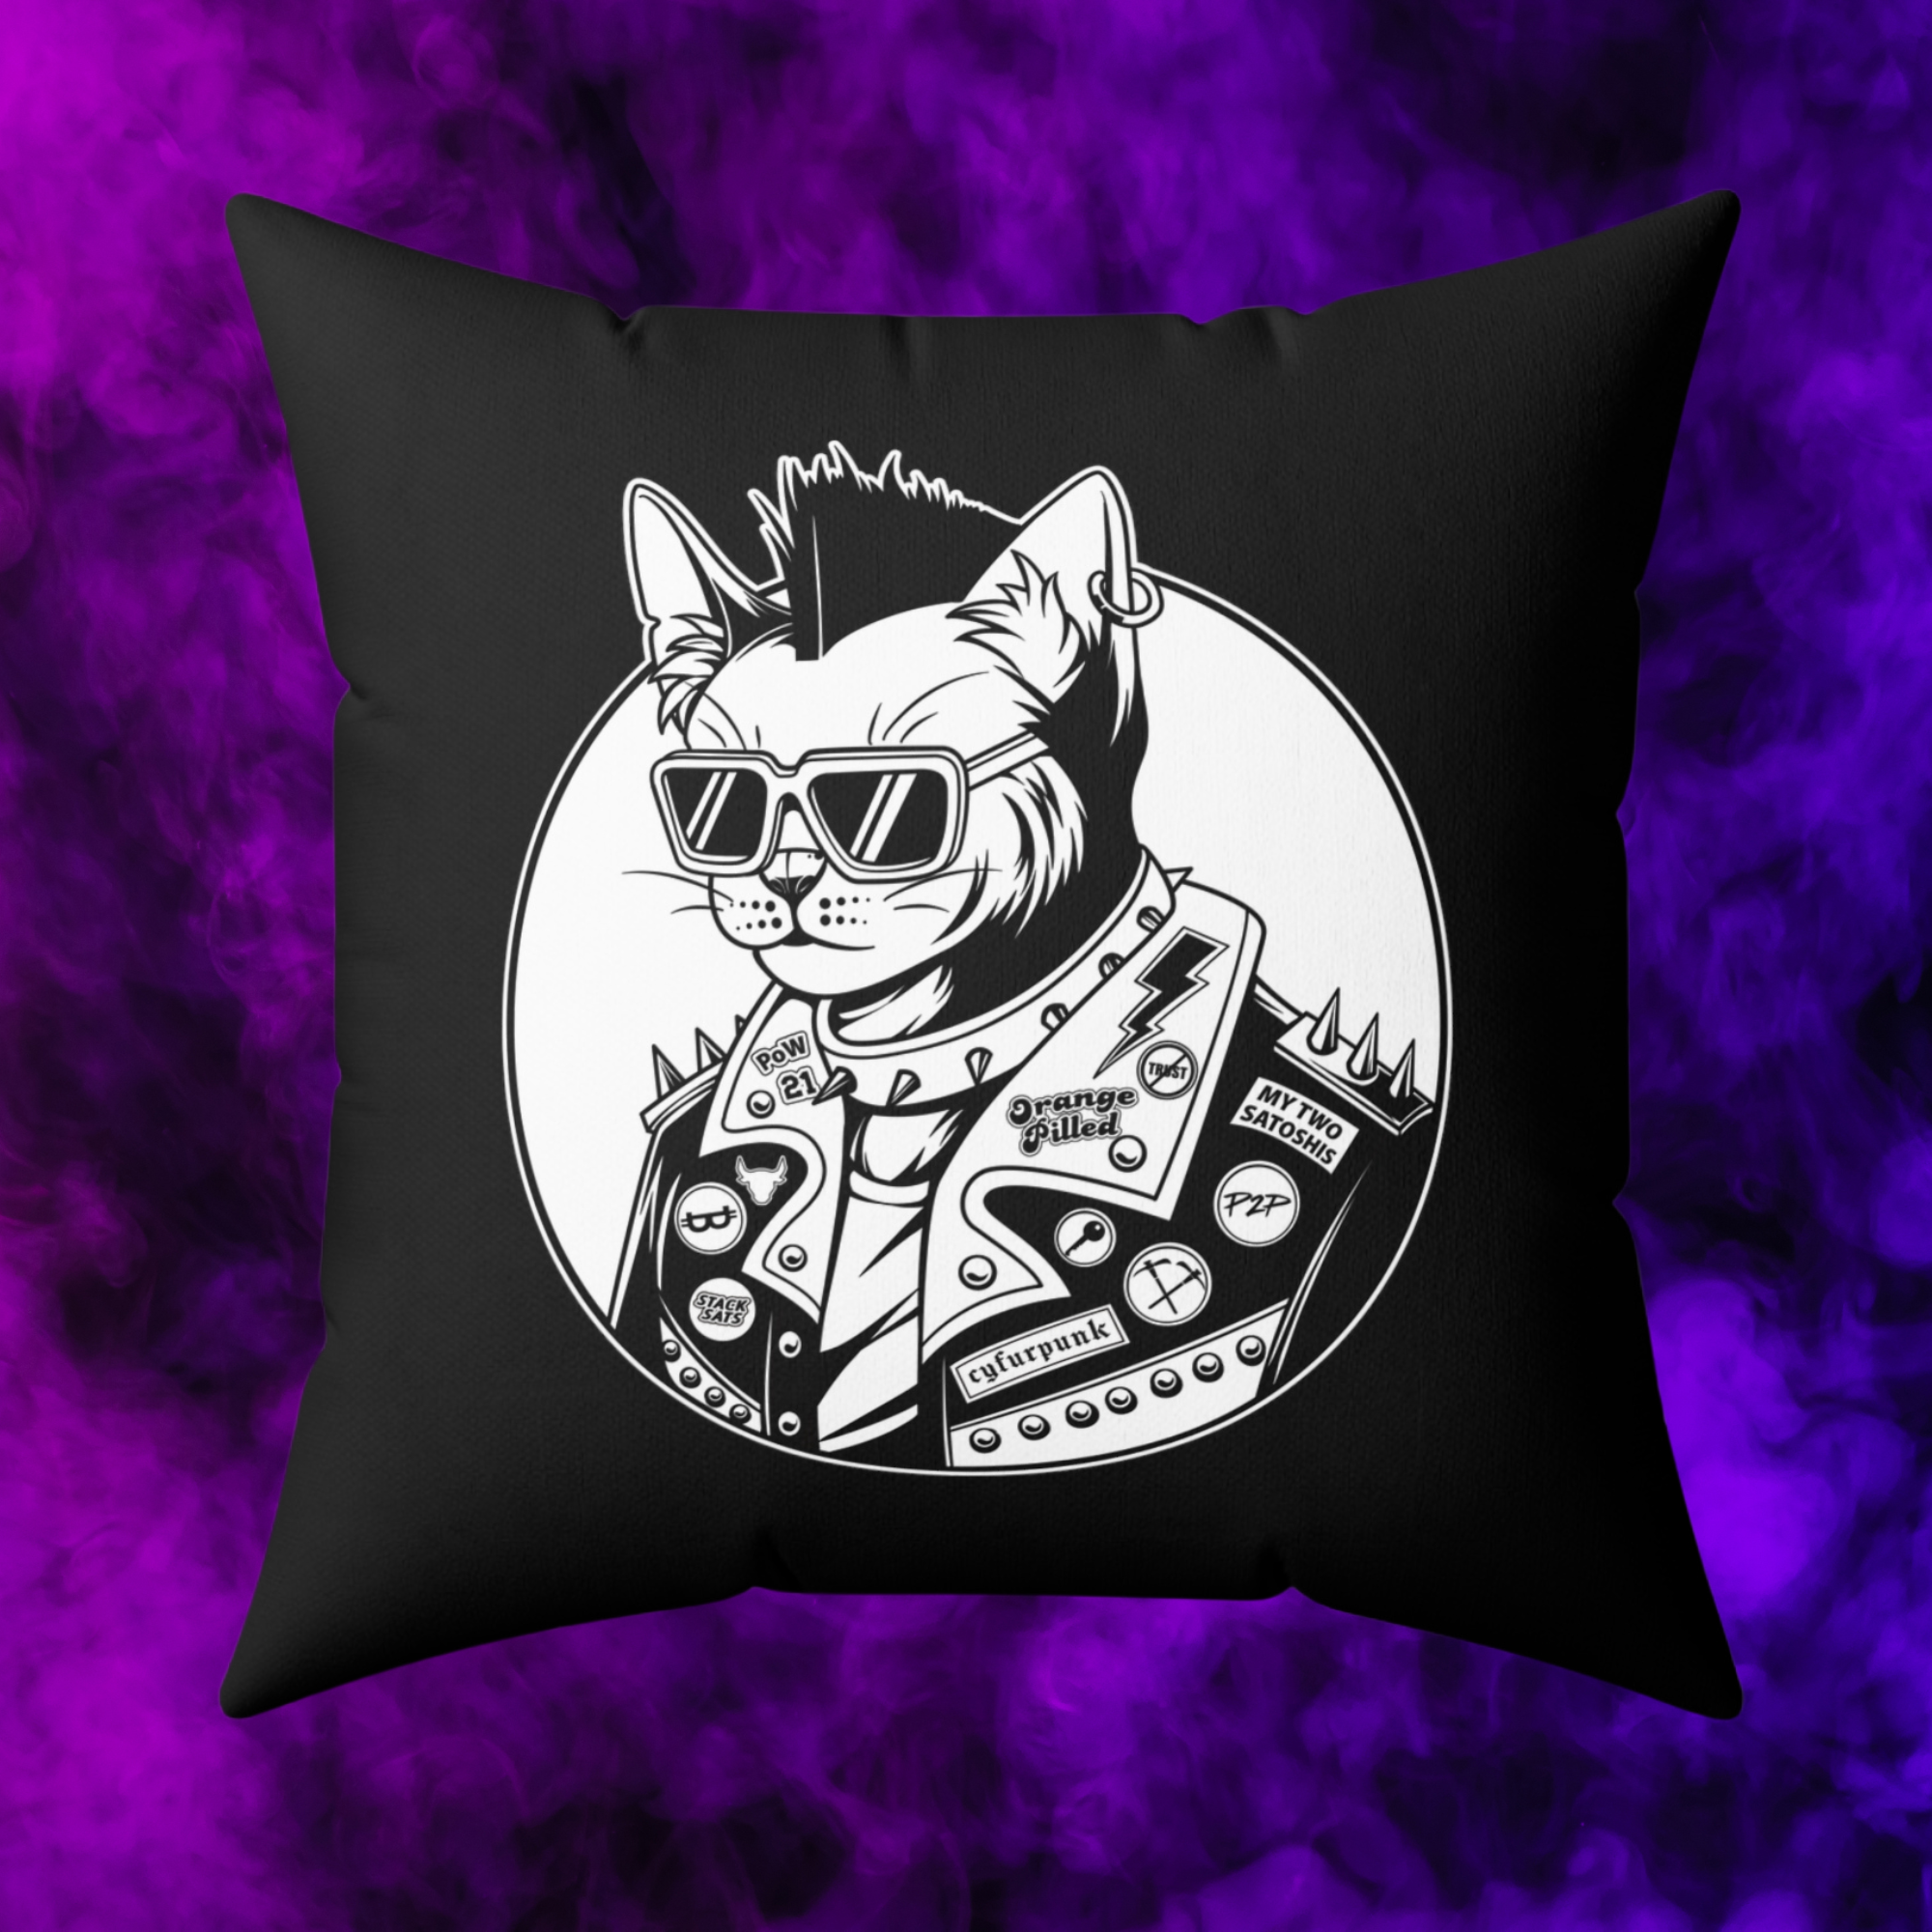 Bitcoin Home Decor - Bitcoin Cyfurpunk Pillow - Front View. Available from NEONCRYPTO STORE.